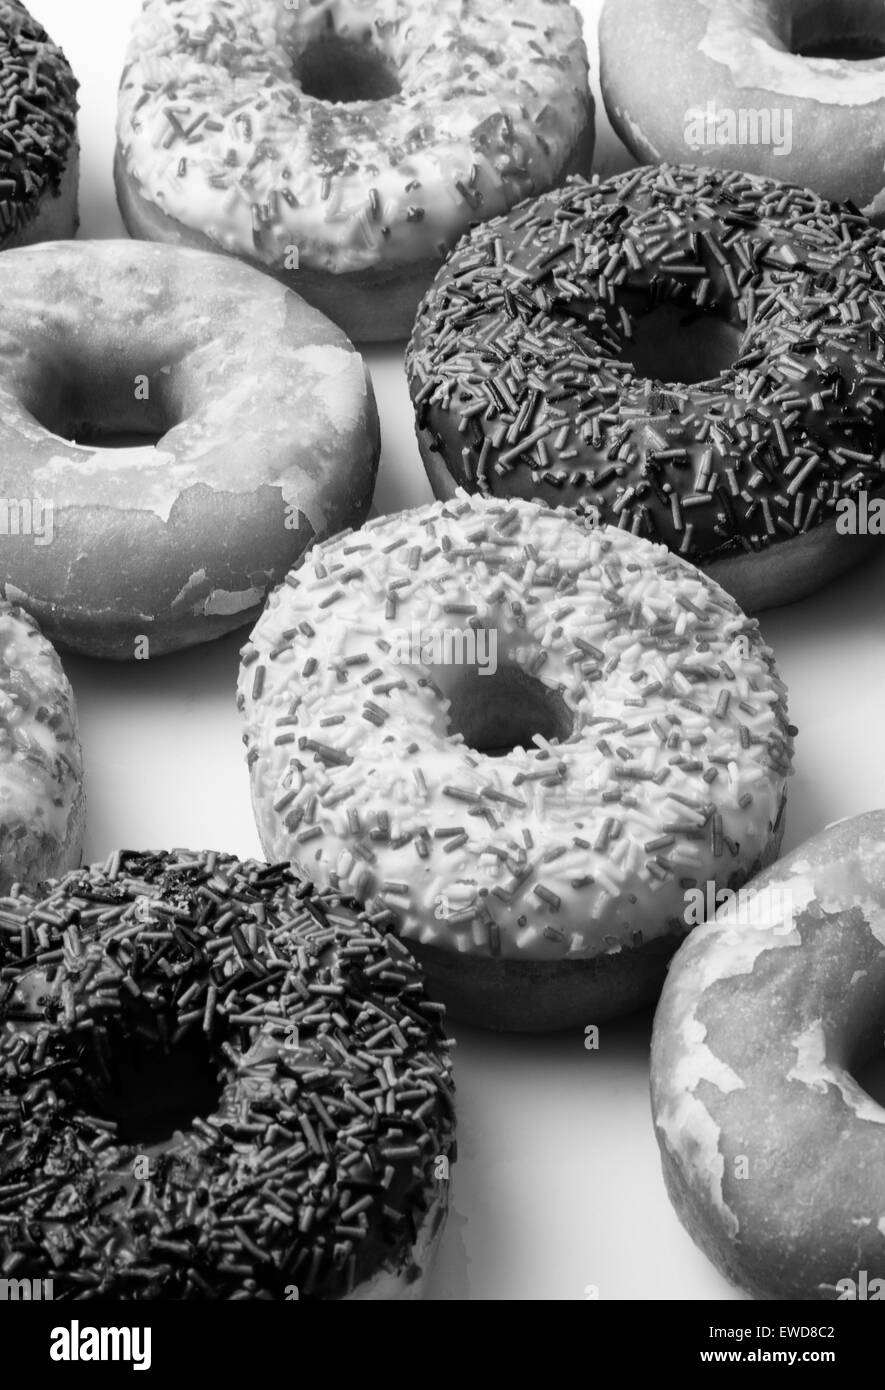 https://c8.alamy.com/comp/EWD8C2/large-selection-of-donuts-many-different-flavors-shot-on-white-background-EWD8C2.jpg